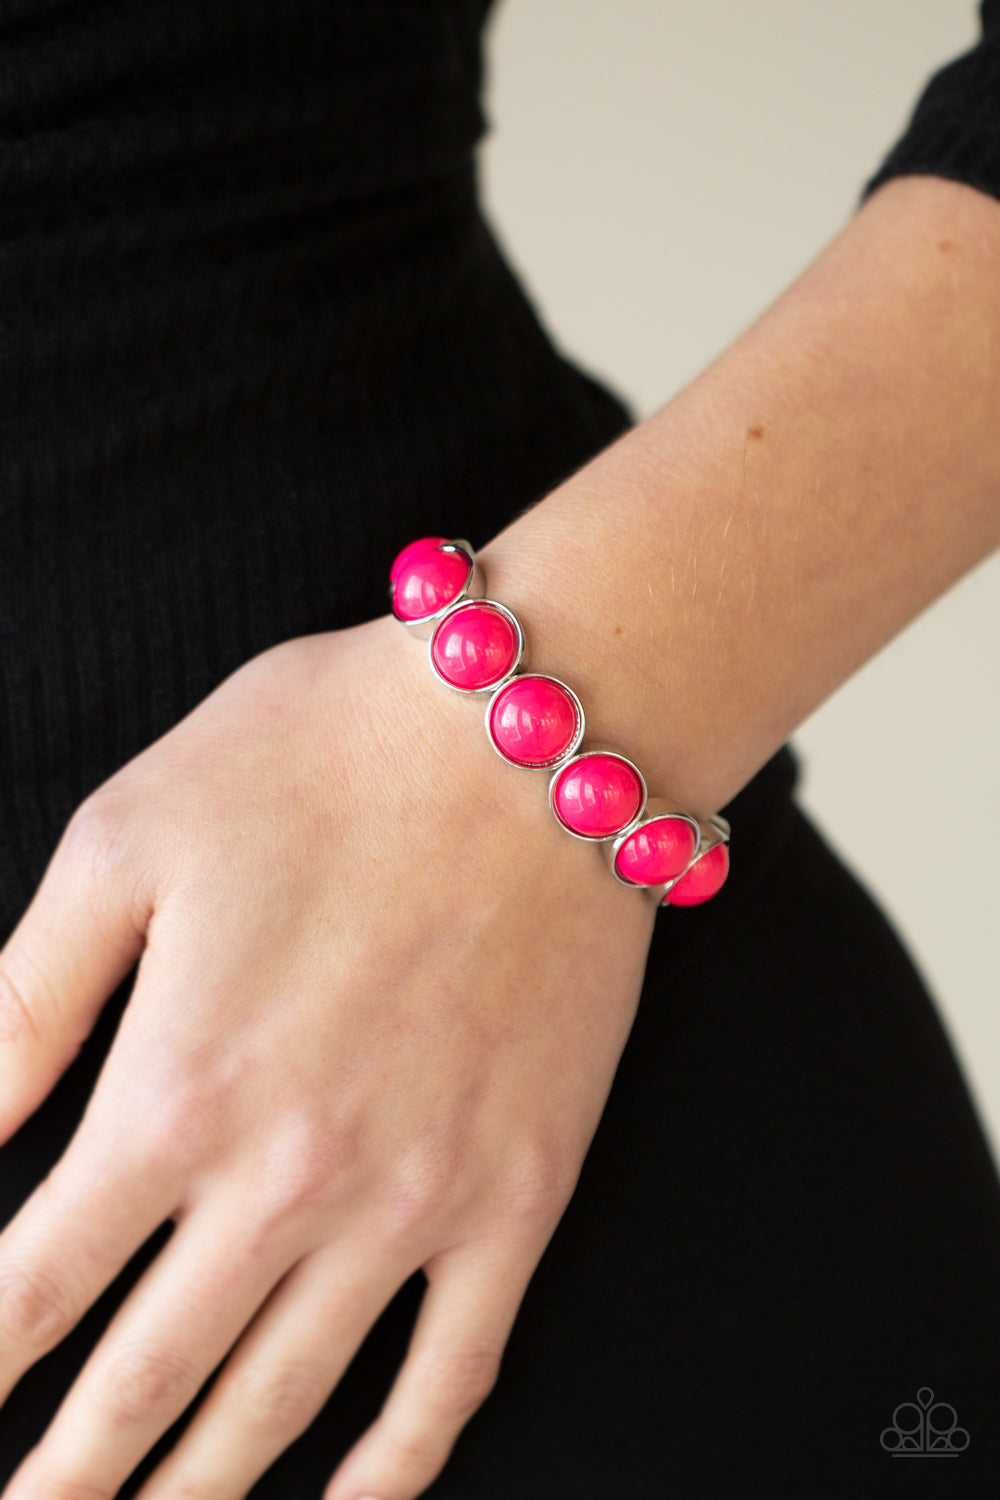 POP, Drop, and Roll Pink Bracelet - Paparazzi Accessories  Featuring flamboyant pink beaded centers, bubbly silver frames are threaded along stretchy bands around the wrist for a powerful pop of color.  All Paparazzi Accessories are lead free and nickel free!  Sold as one individual bracelet.